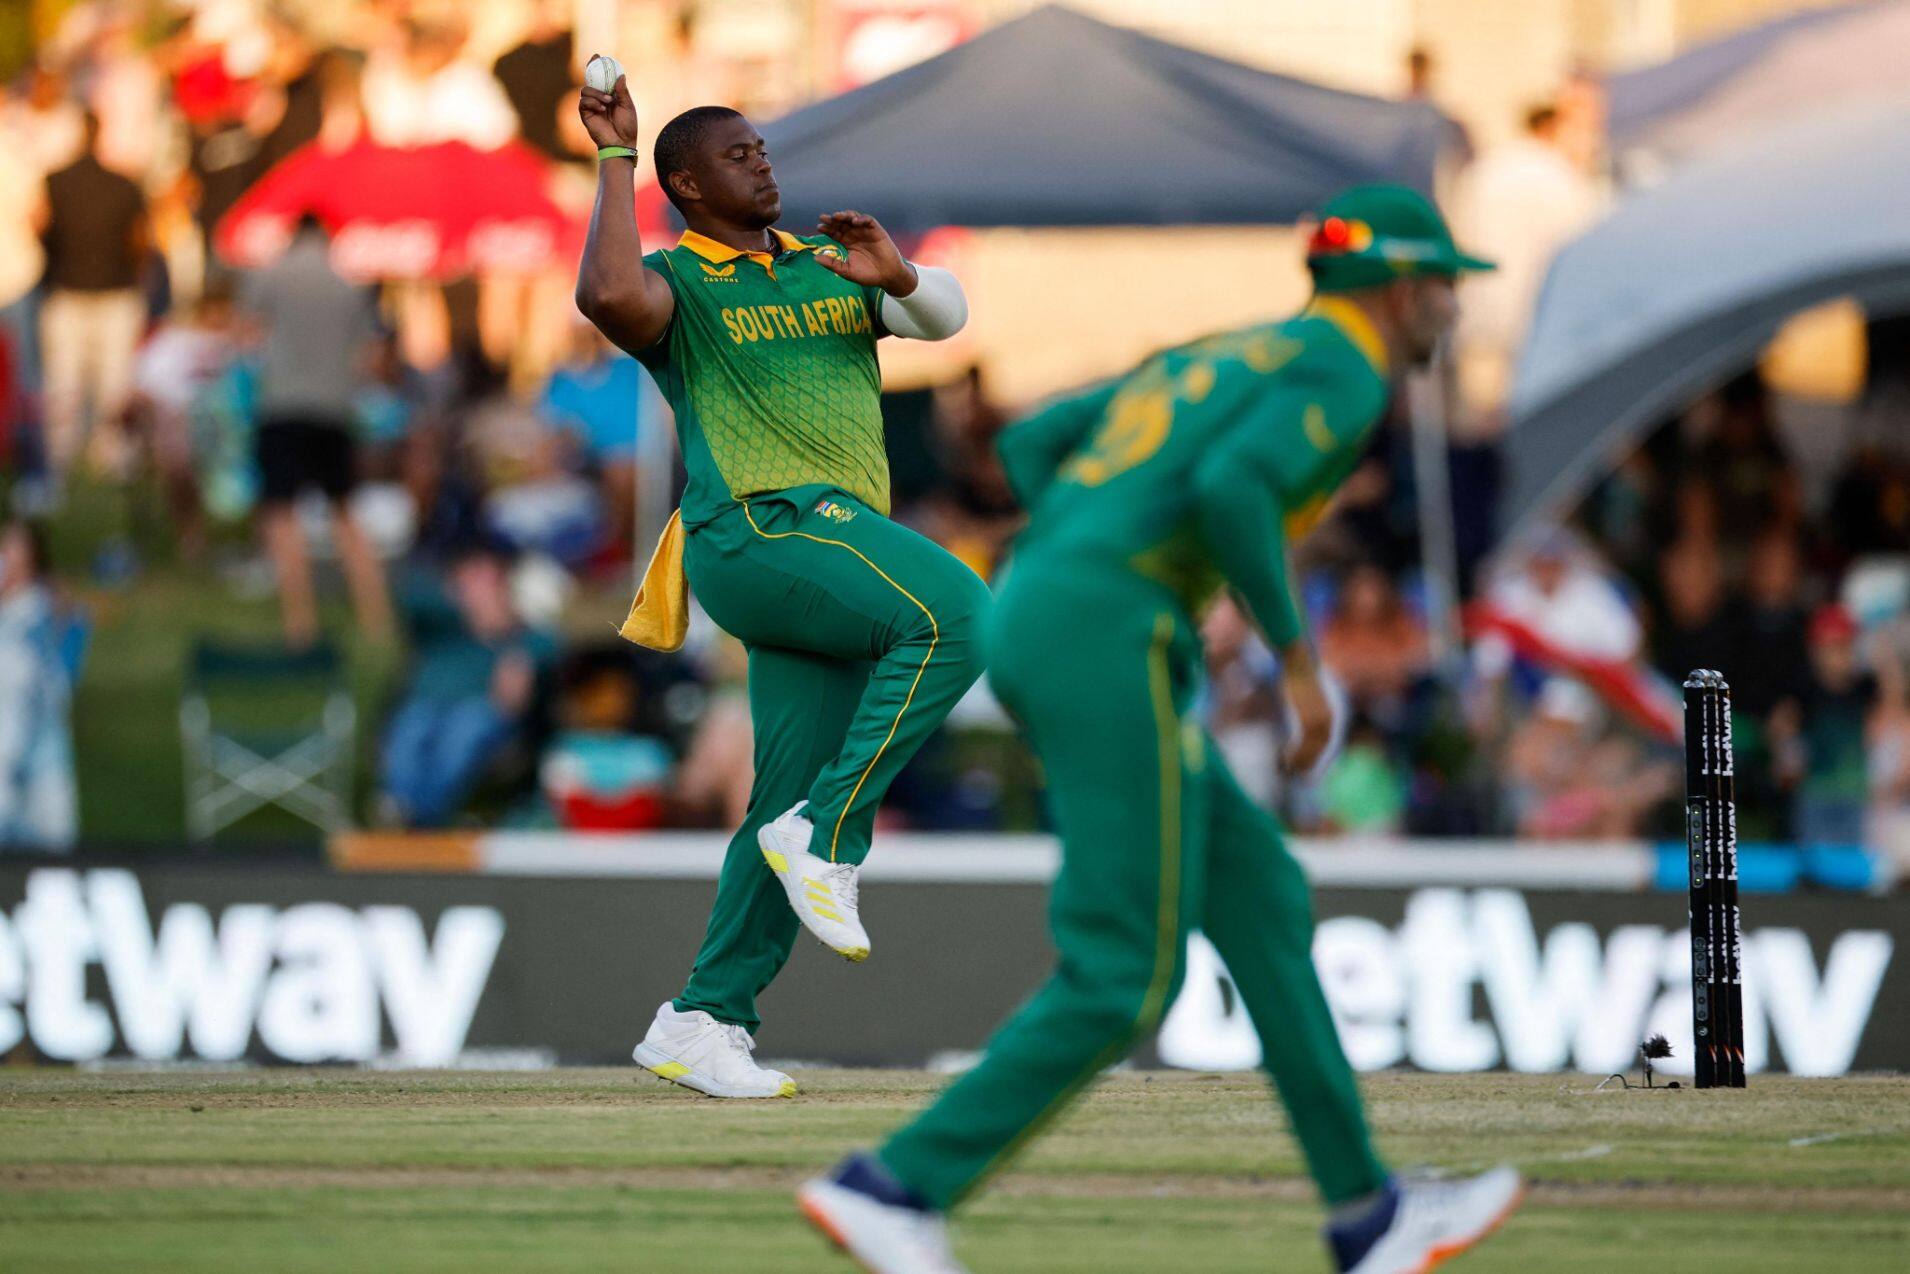 Game plan was to bowl as straight as possible: Sisanda Magala